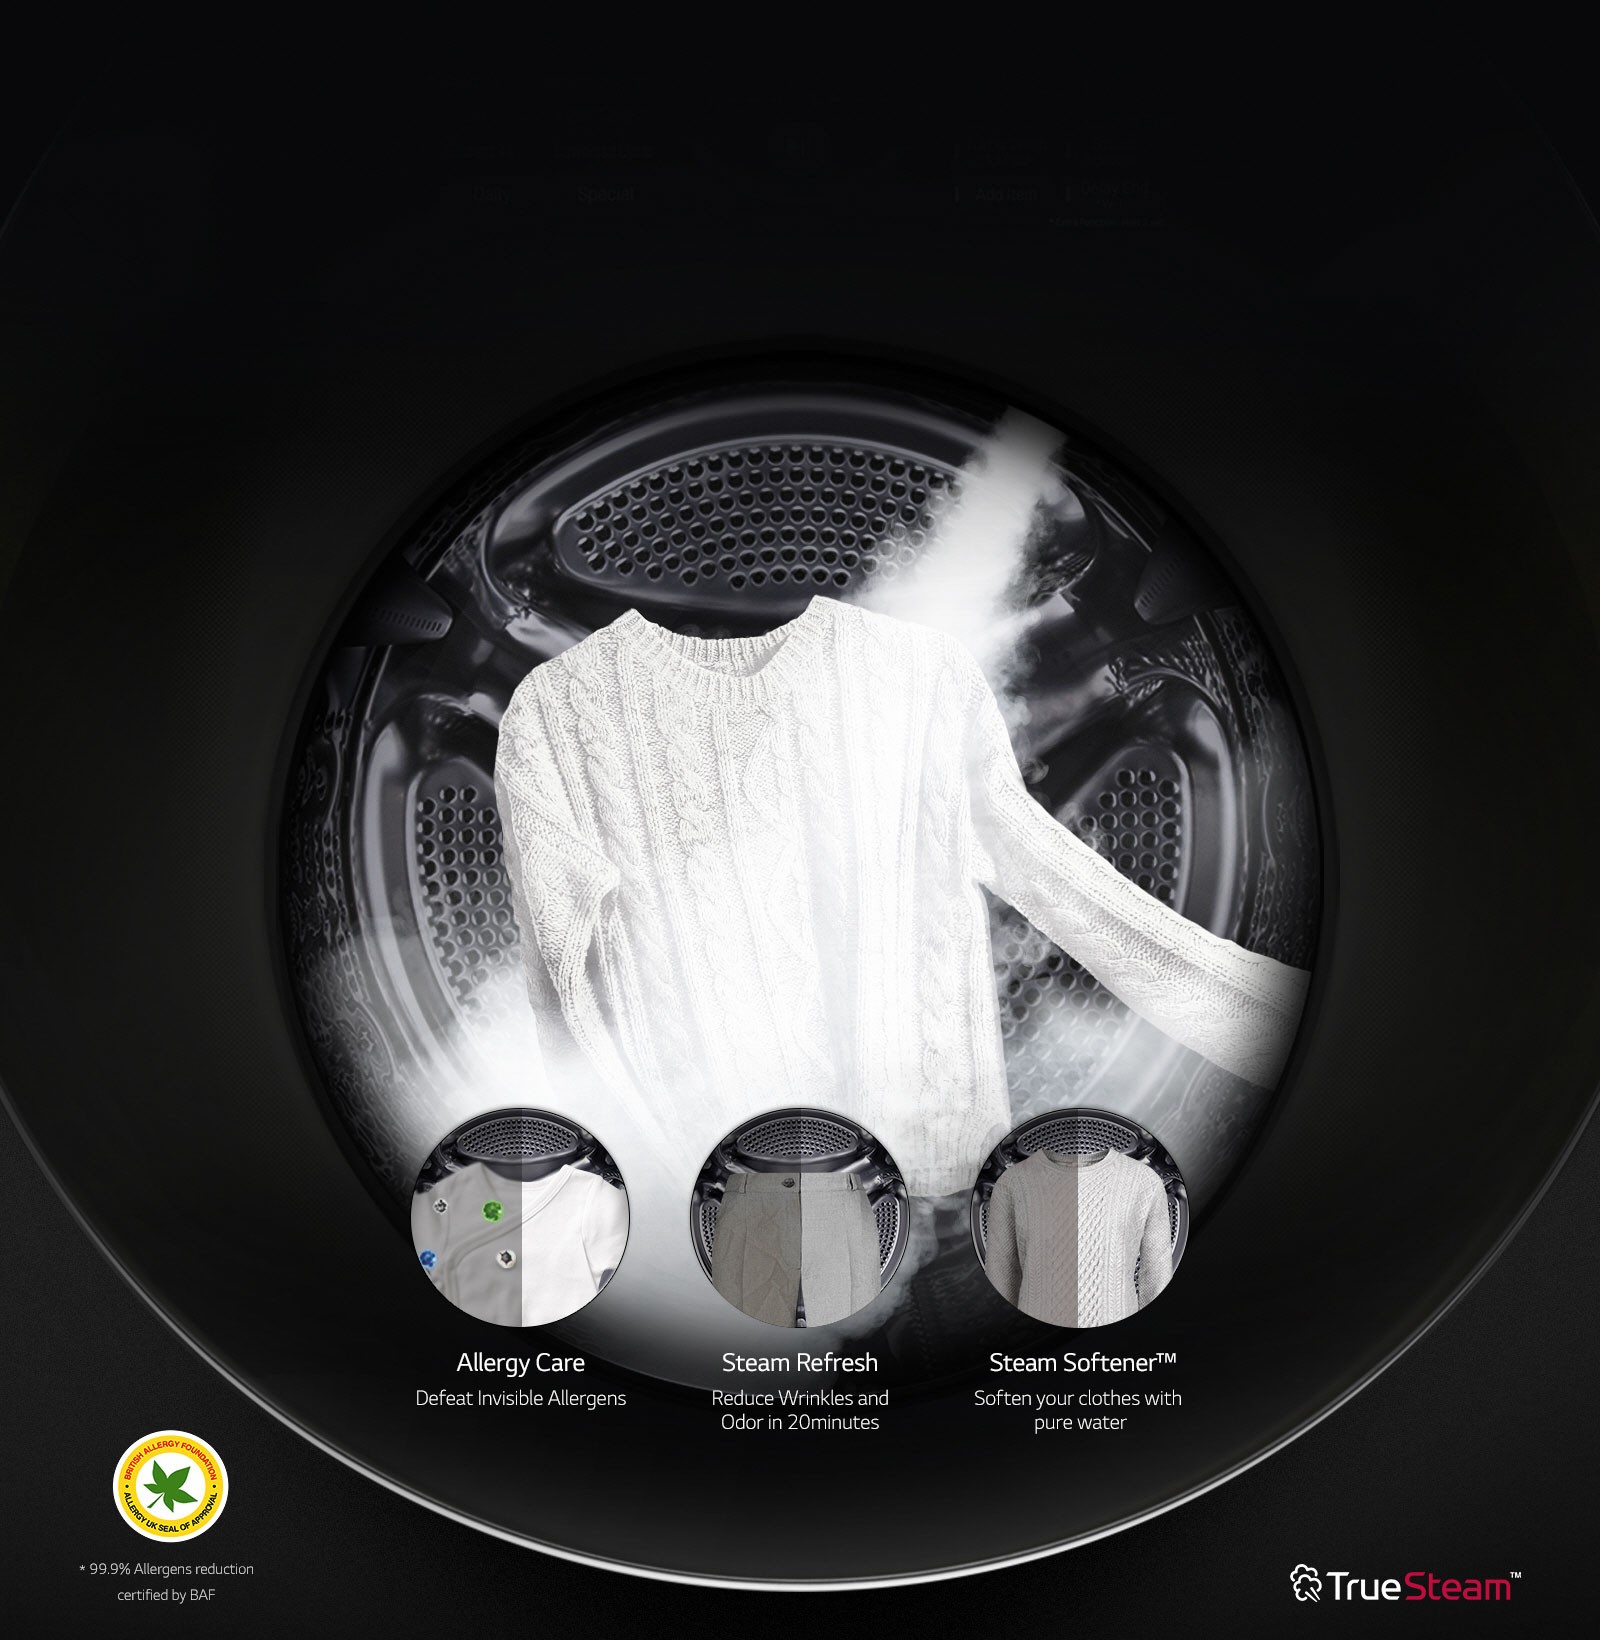 Promotional image showing inside an LG washing machine’s drum as its TrueSteamTM technology cleans a sweater, with icons overlapping to highlight its Allergy Care, Steam Refresh and Steam Softener features